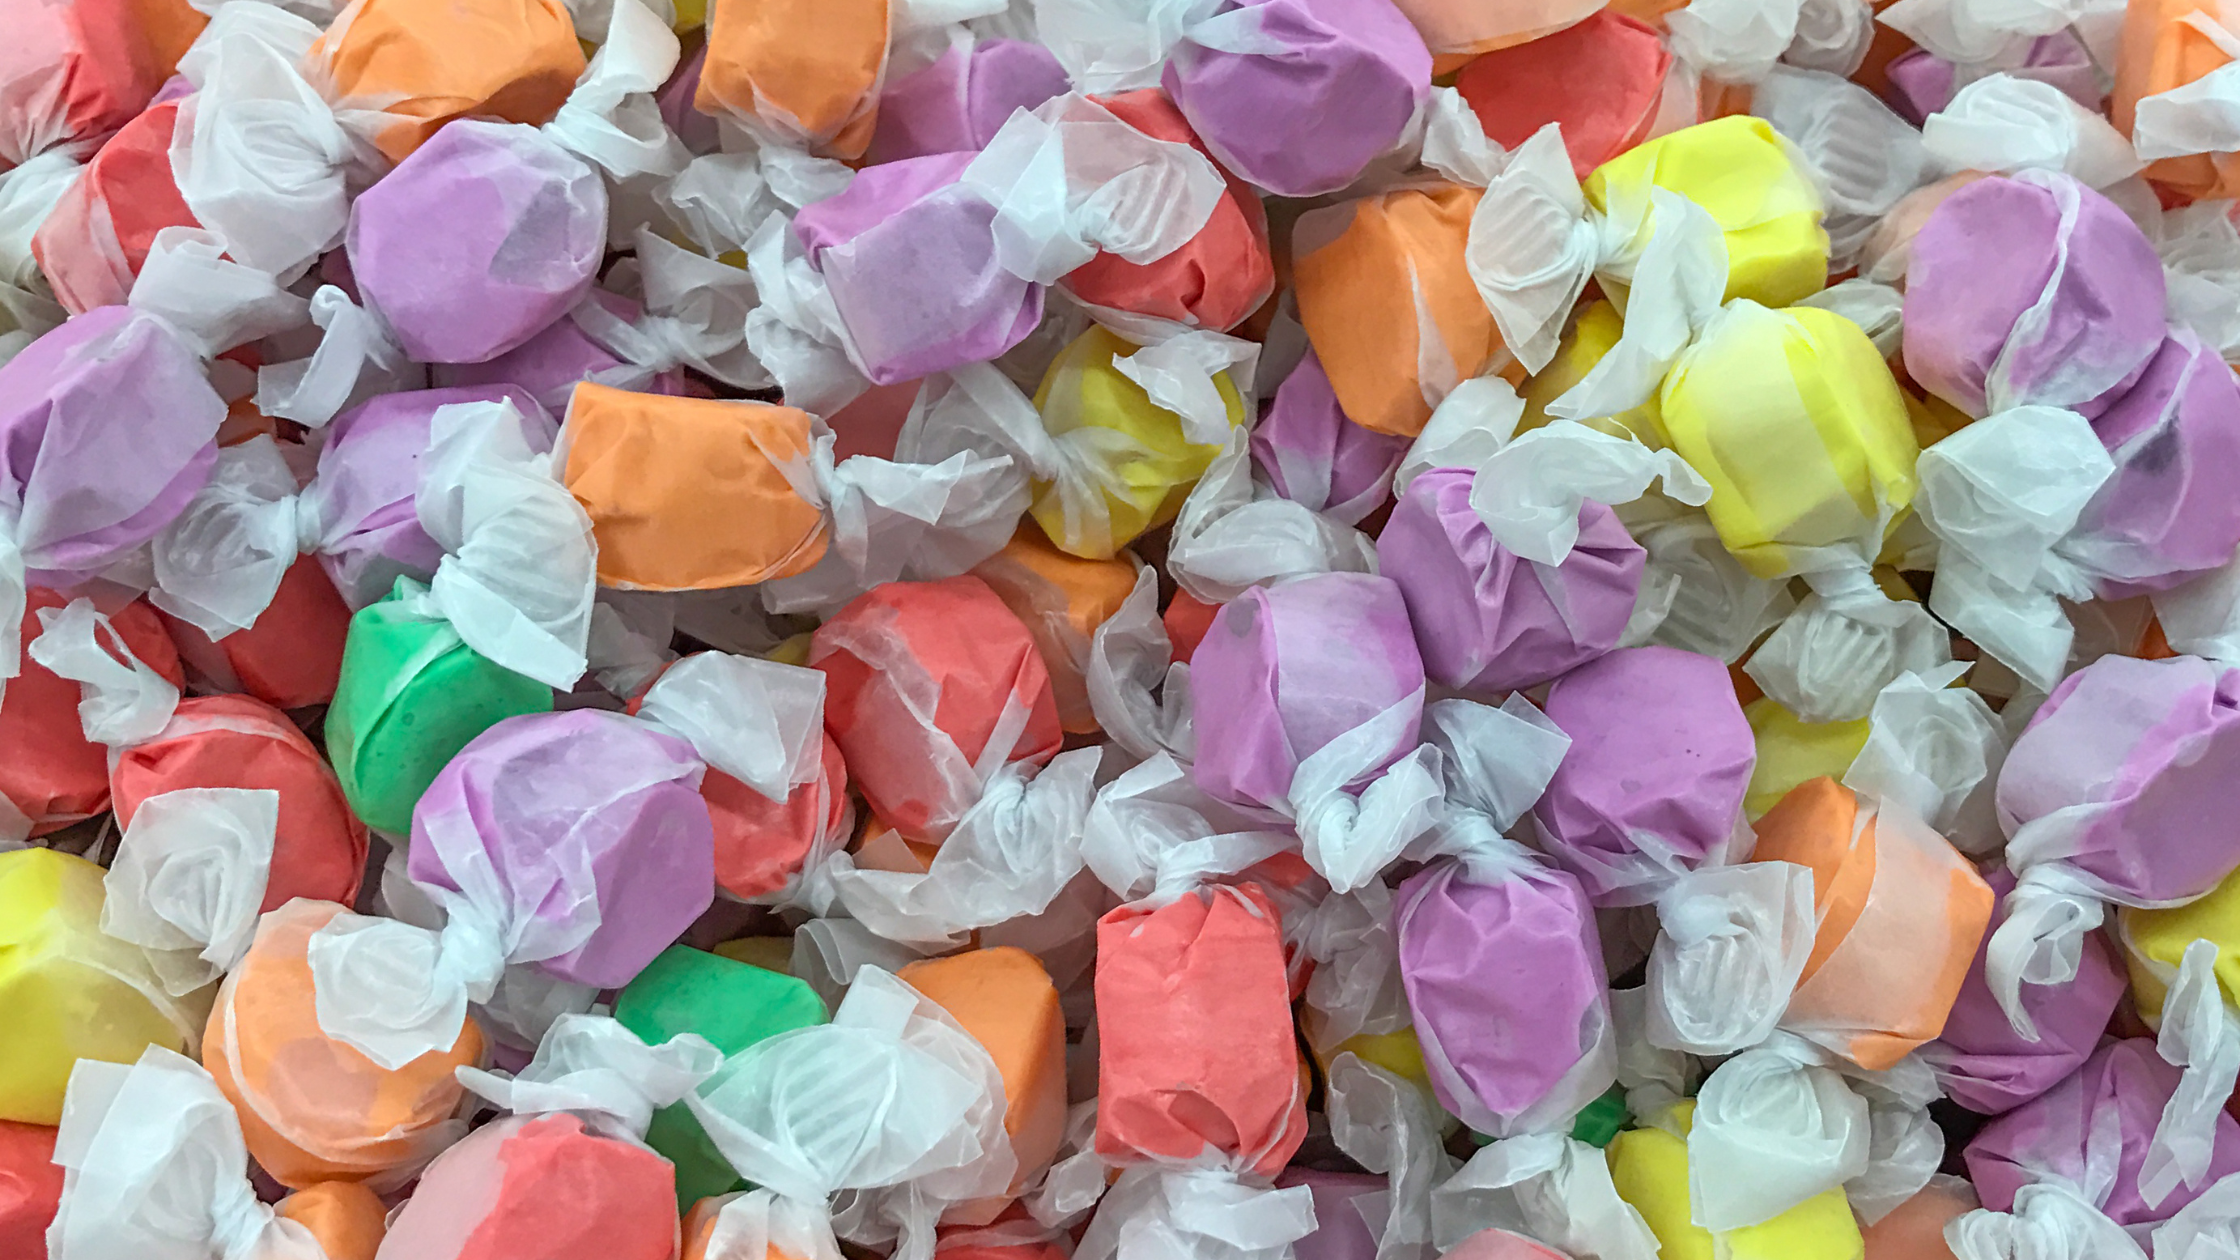 The Top 7 Best Taffy Brands Selling Right Now